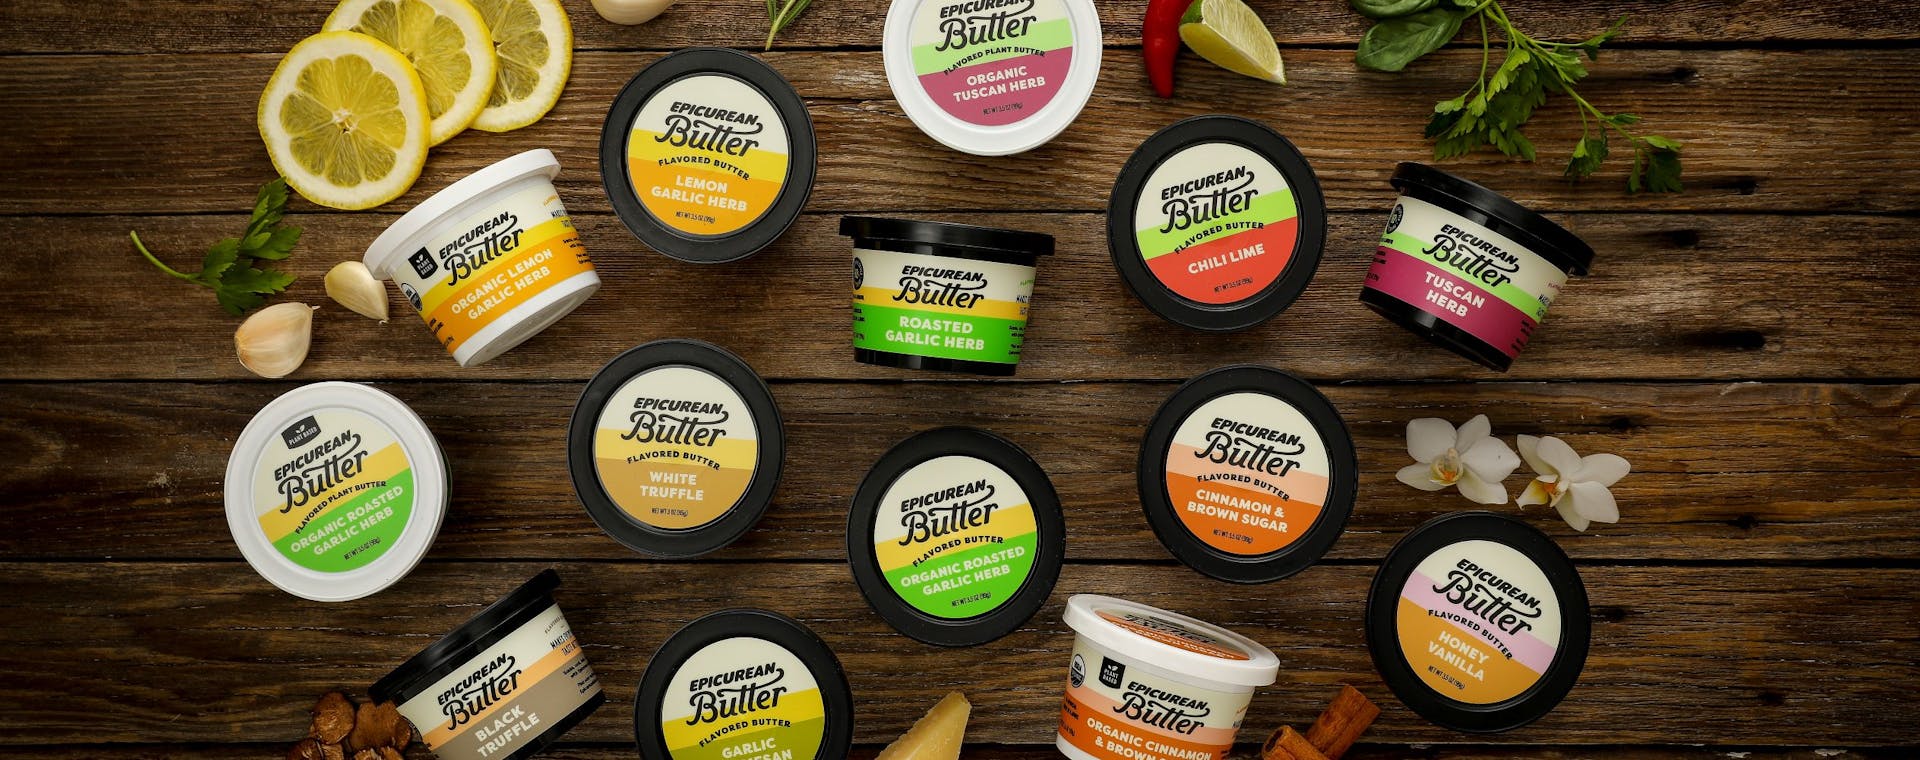 Epicurean Butter's line of flavored butter